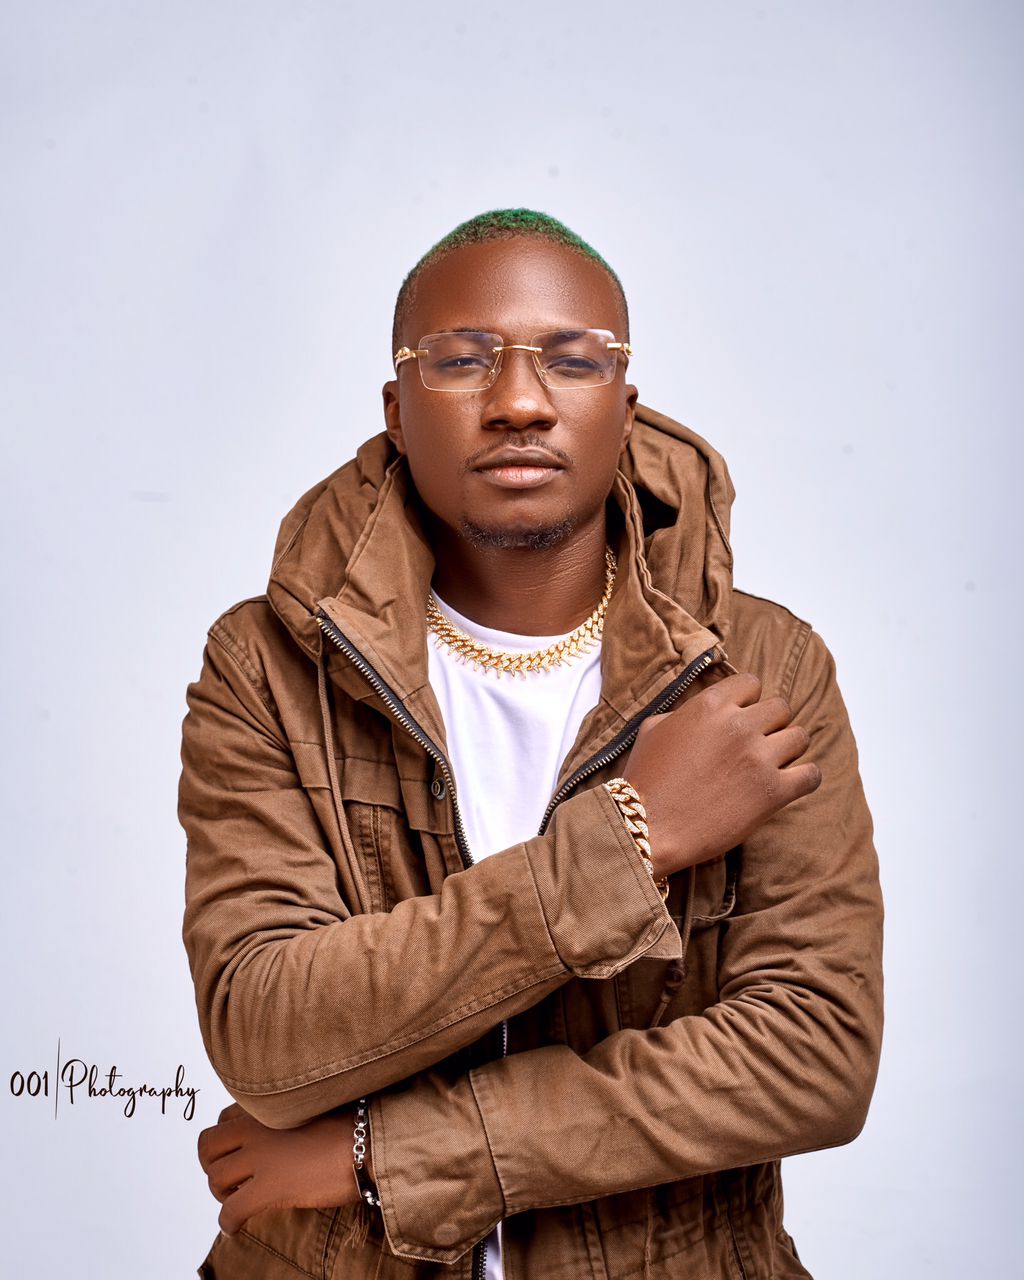 [Artist profile] Full biography of Del Vee - Nigerian Singer,Song writer and performer